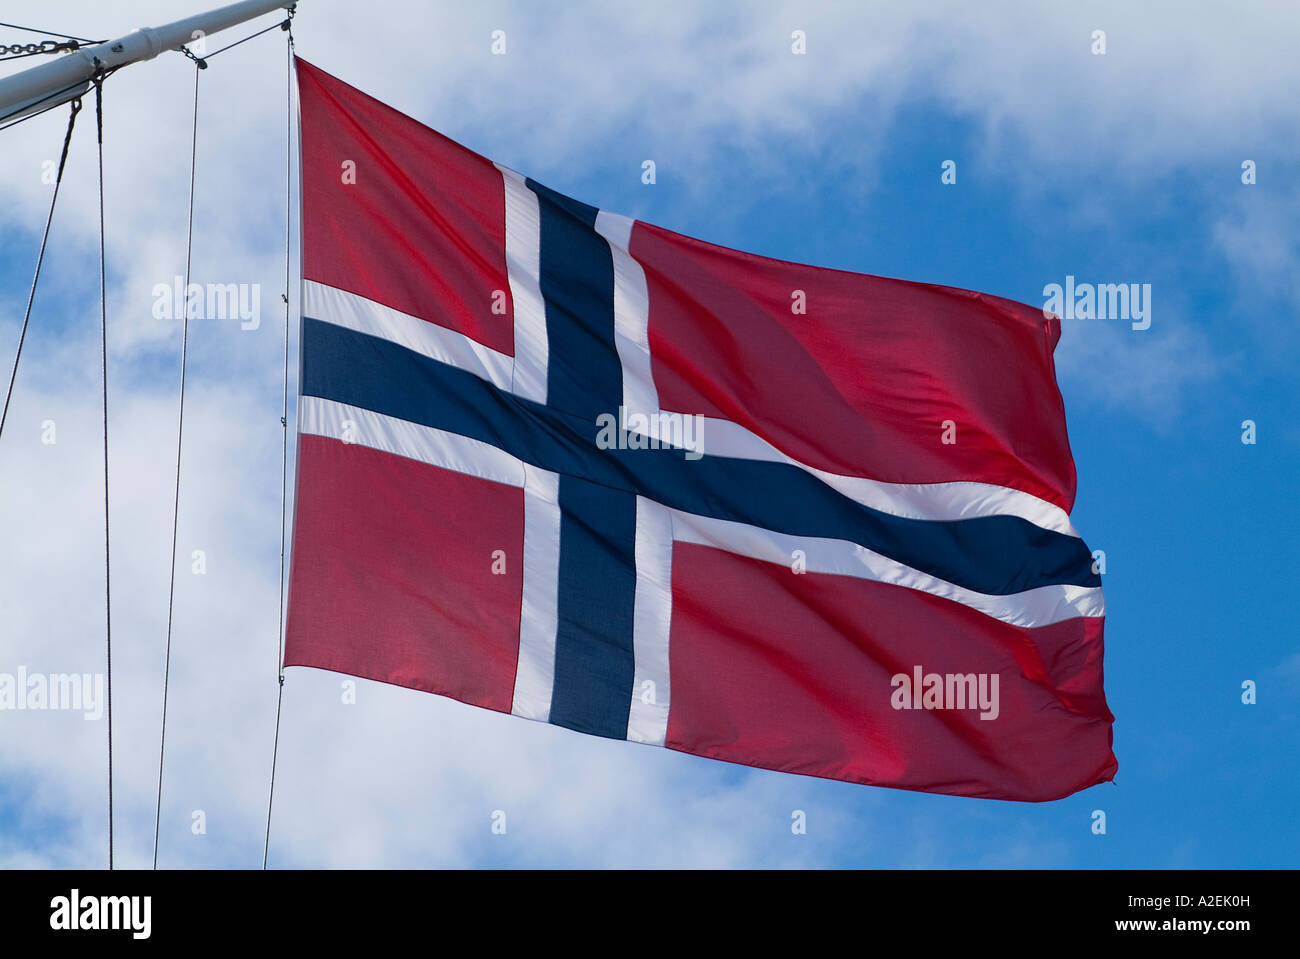 dh Norwegian flag FLAG NORWAY Red background with white and blue cross  ensign on board sailing ship fly nation colours ships flags Stock Photo -  Alamy